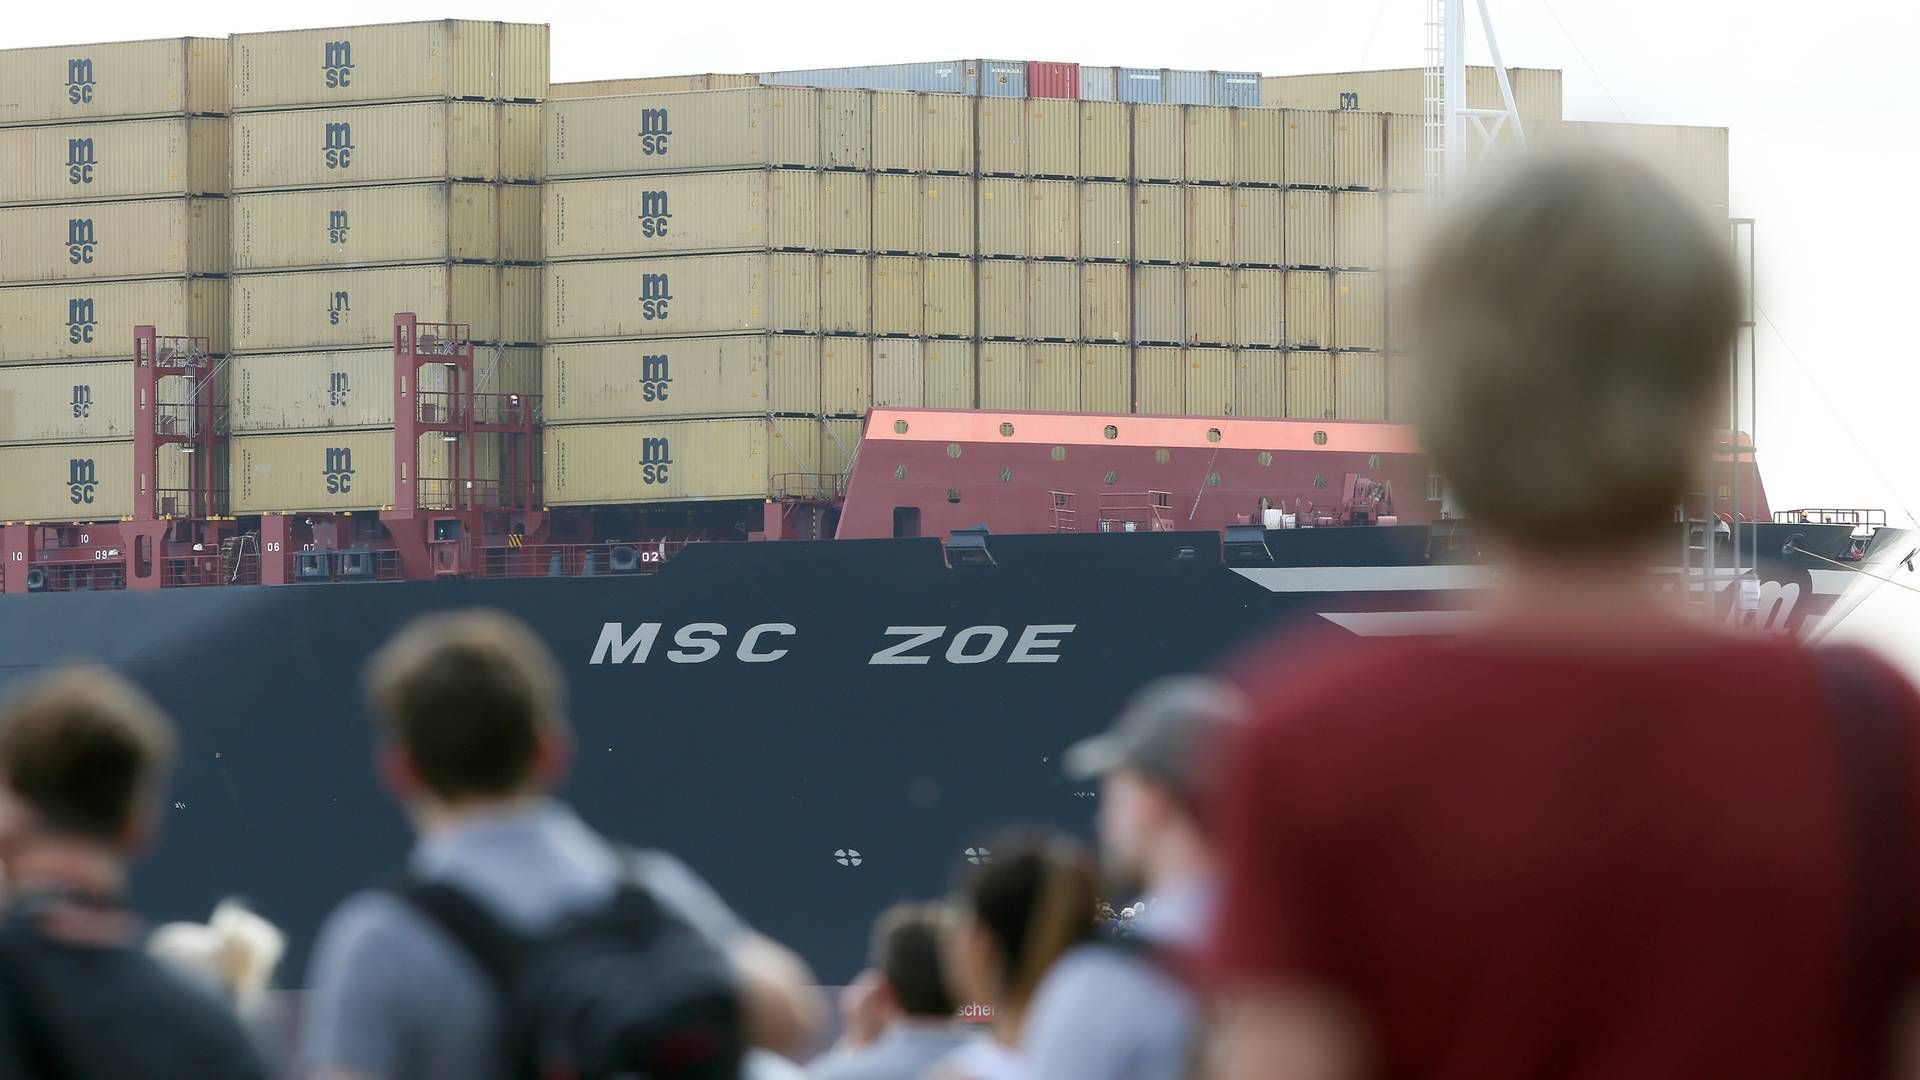 Geneva-based carrier MSC has several Chinese-owned ships in its fleet. These include vessel MSC Zoe, which is ultimately owned by the Chinese state-owned Bank of Communications. | Photo: Bodo Marks/AP/Ritzau Scanpix